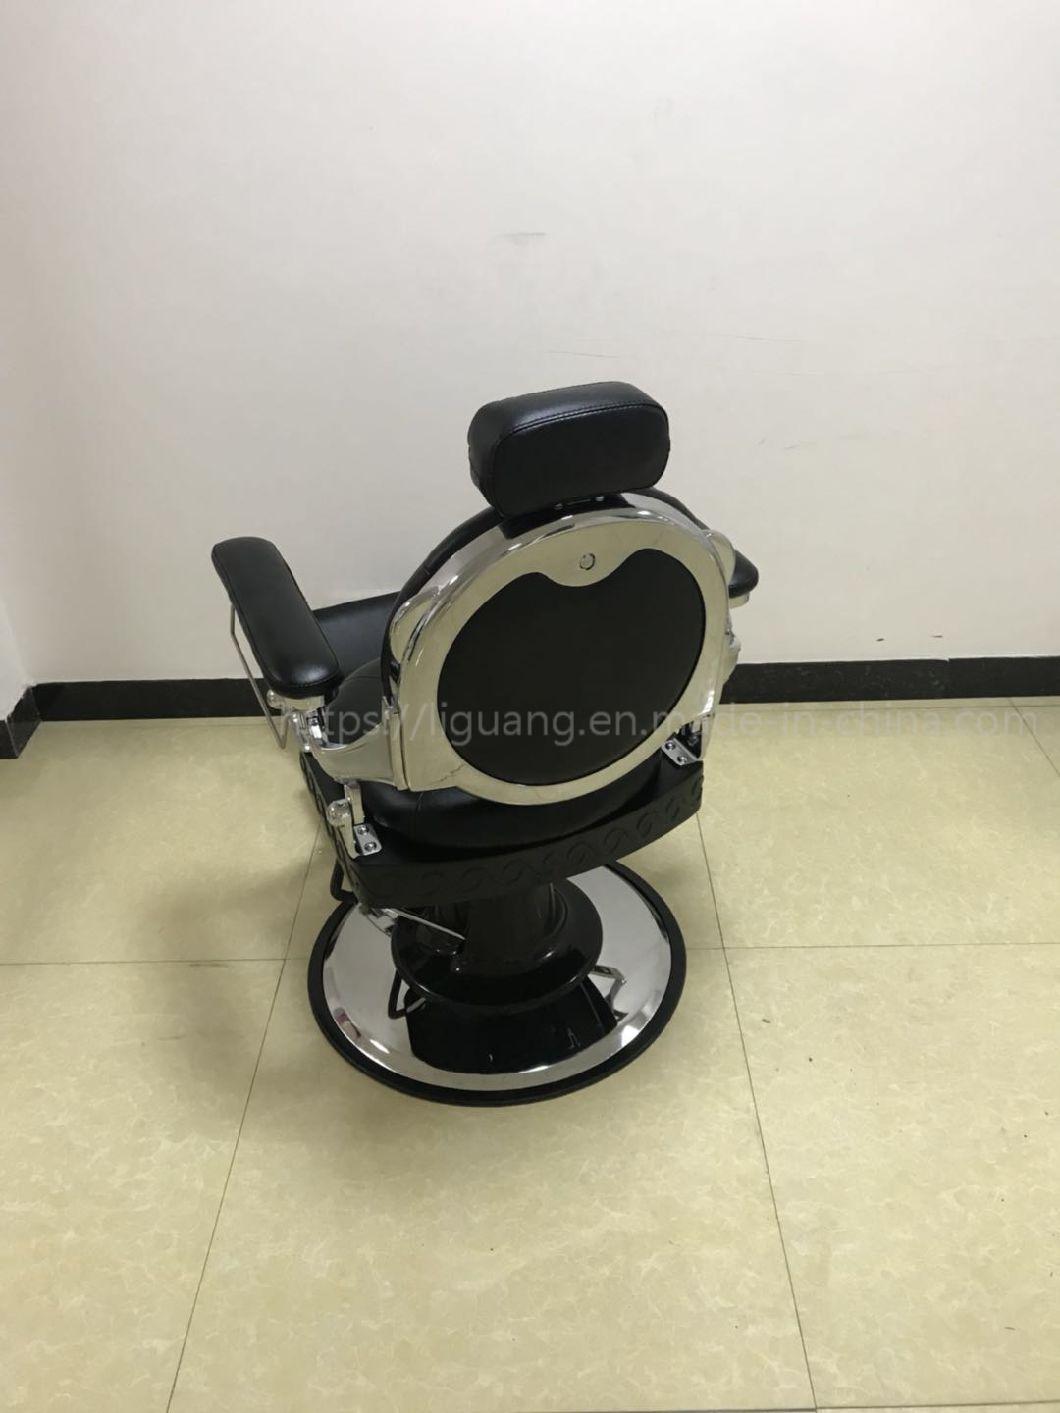 2019 New Barber Chair with White Heavy Duty Salon Chair, Hairdressing Chair